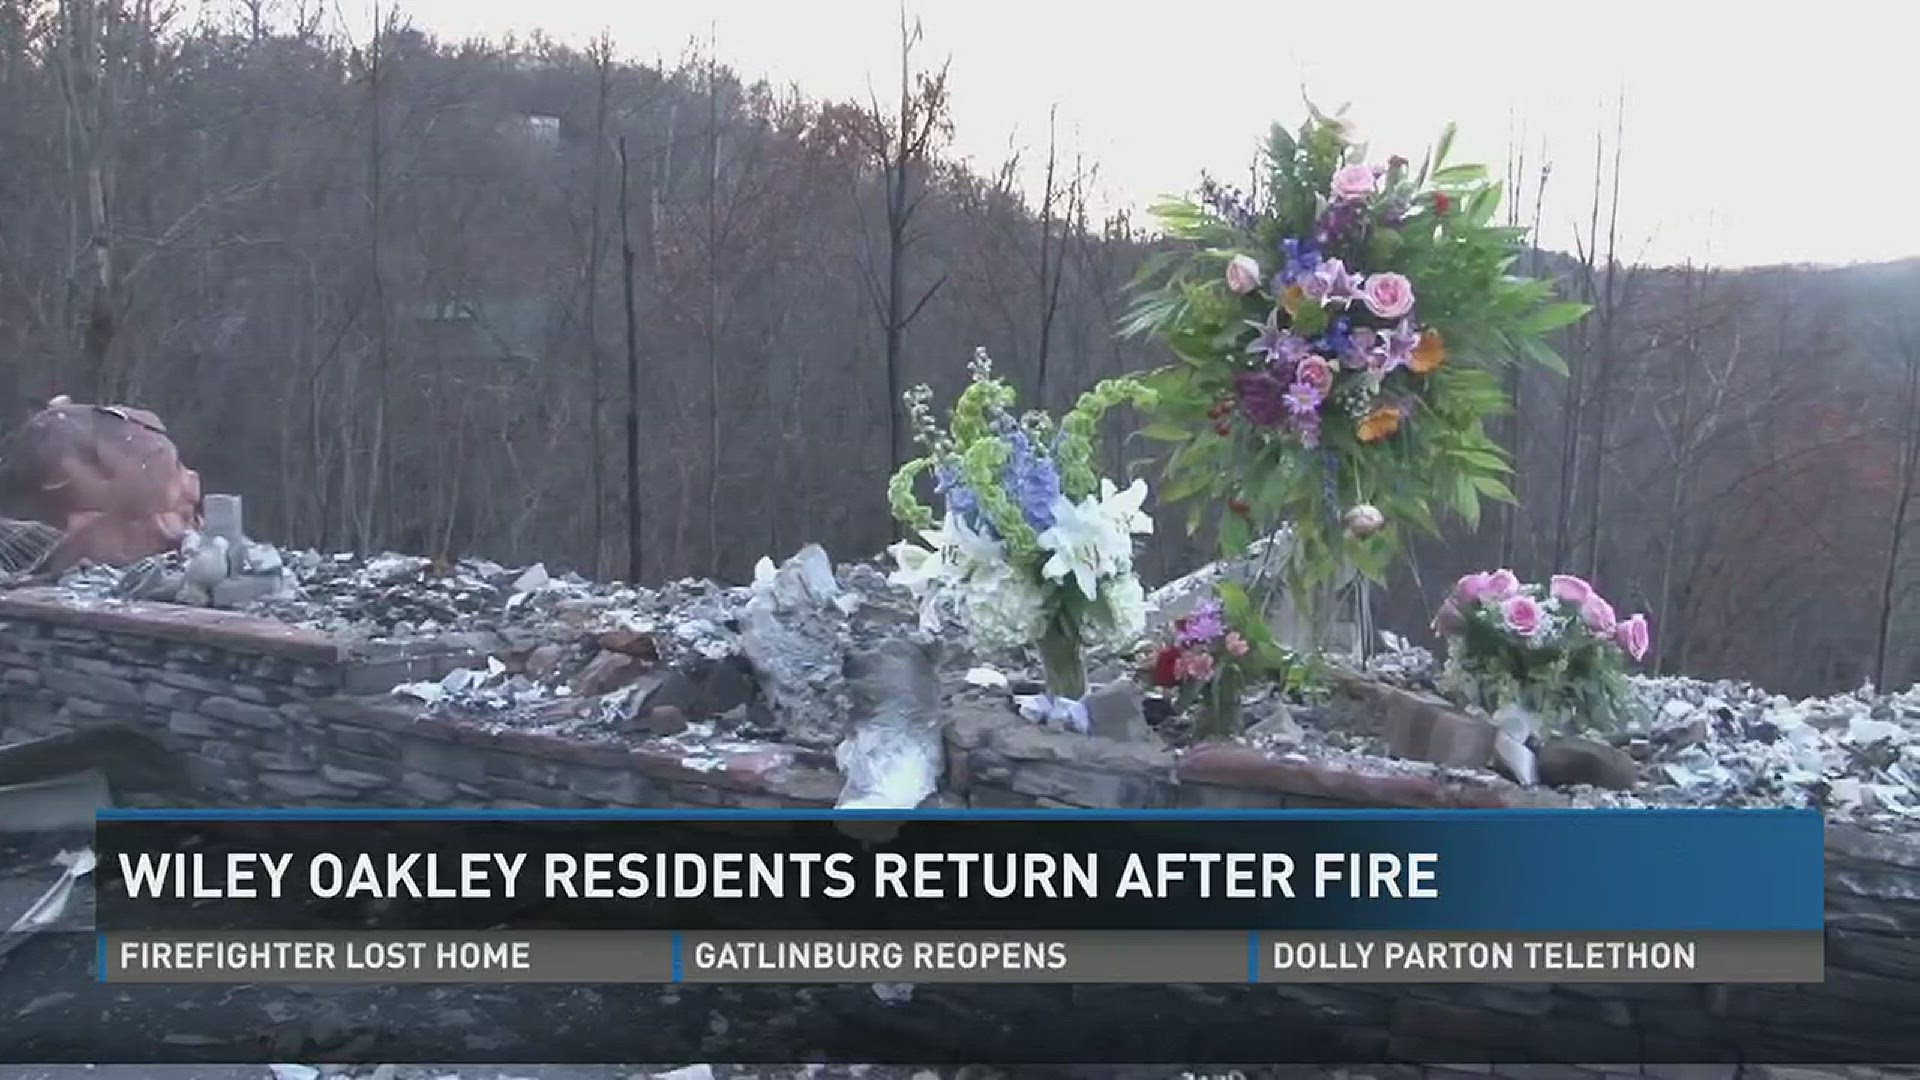 Dec. 8, 2016: One area of Gatlinburg hit especially hard in the recent fires was Wiley Oakley Road. Families were able to return there for the first time Thursday.